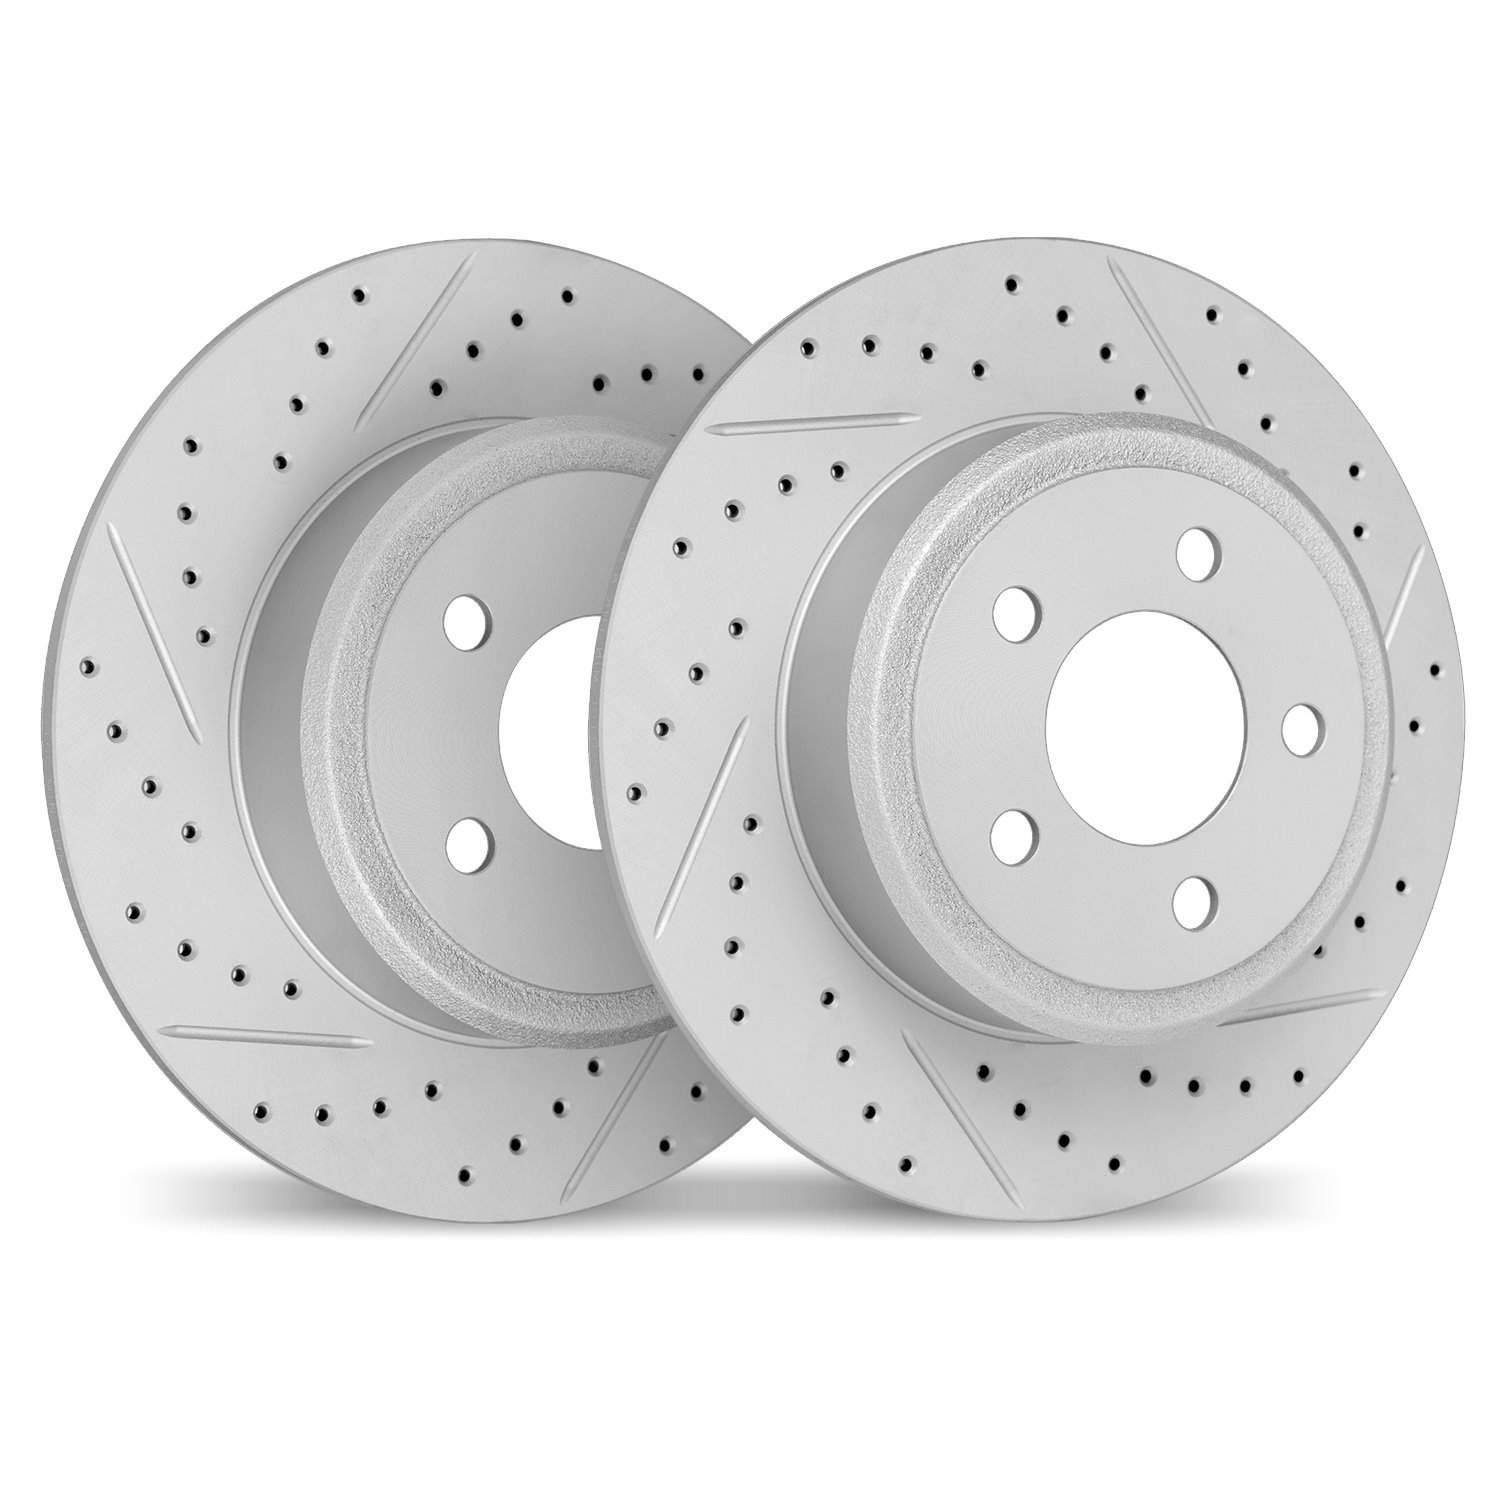 2002-54132 Geoperformance Drilled/Slotted Brake Rotors, 2013-2020 Ford/Lincoln/Mercury/Mazda, Position: Rear